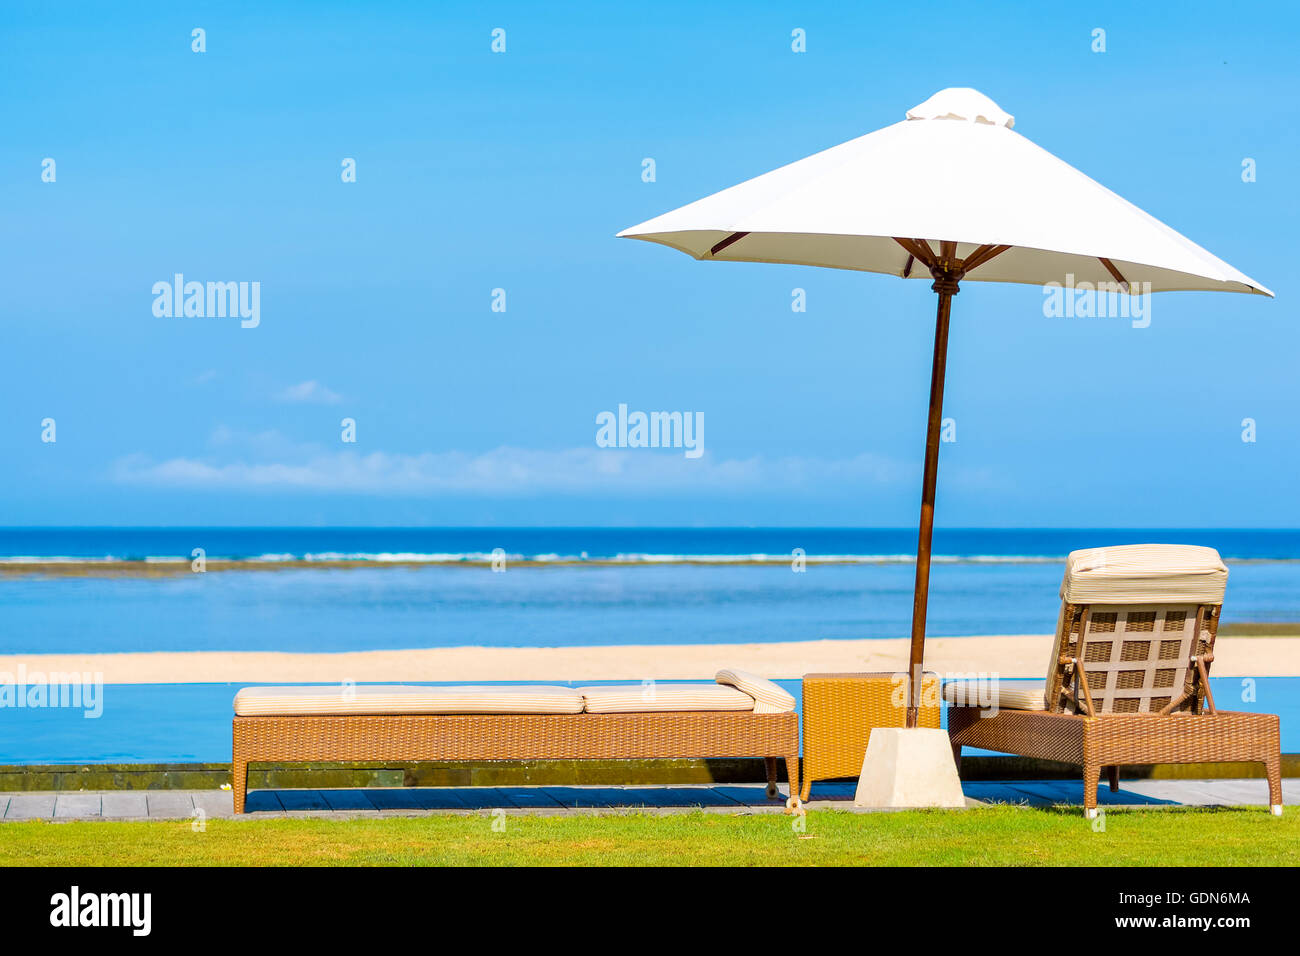 Sun umbrella & daybeds overlooking beautiful tropical beach in Bali on a perfect sunny day. Stock Photo